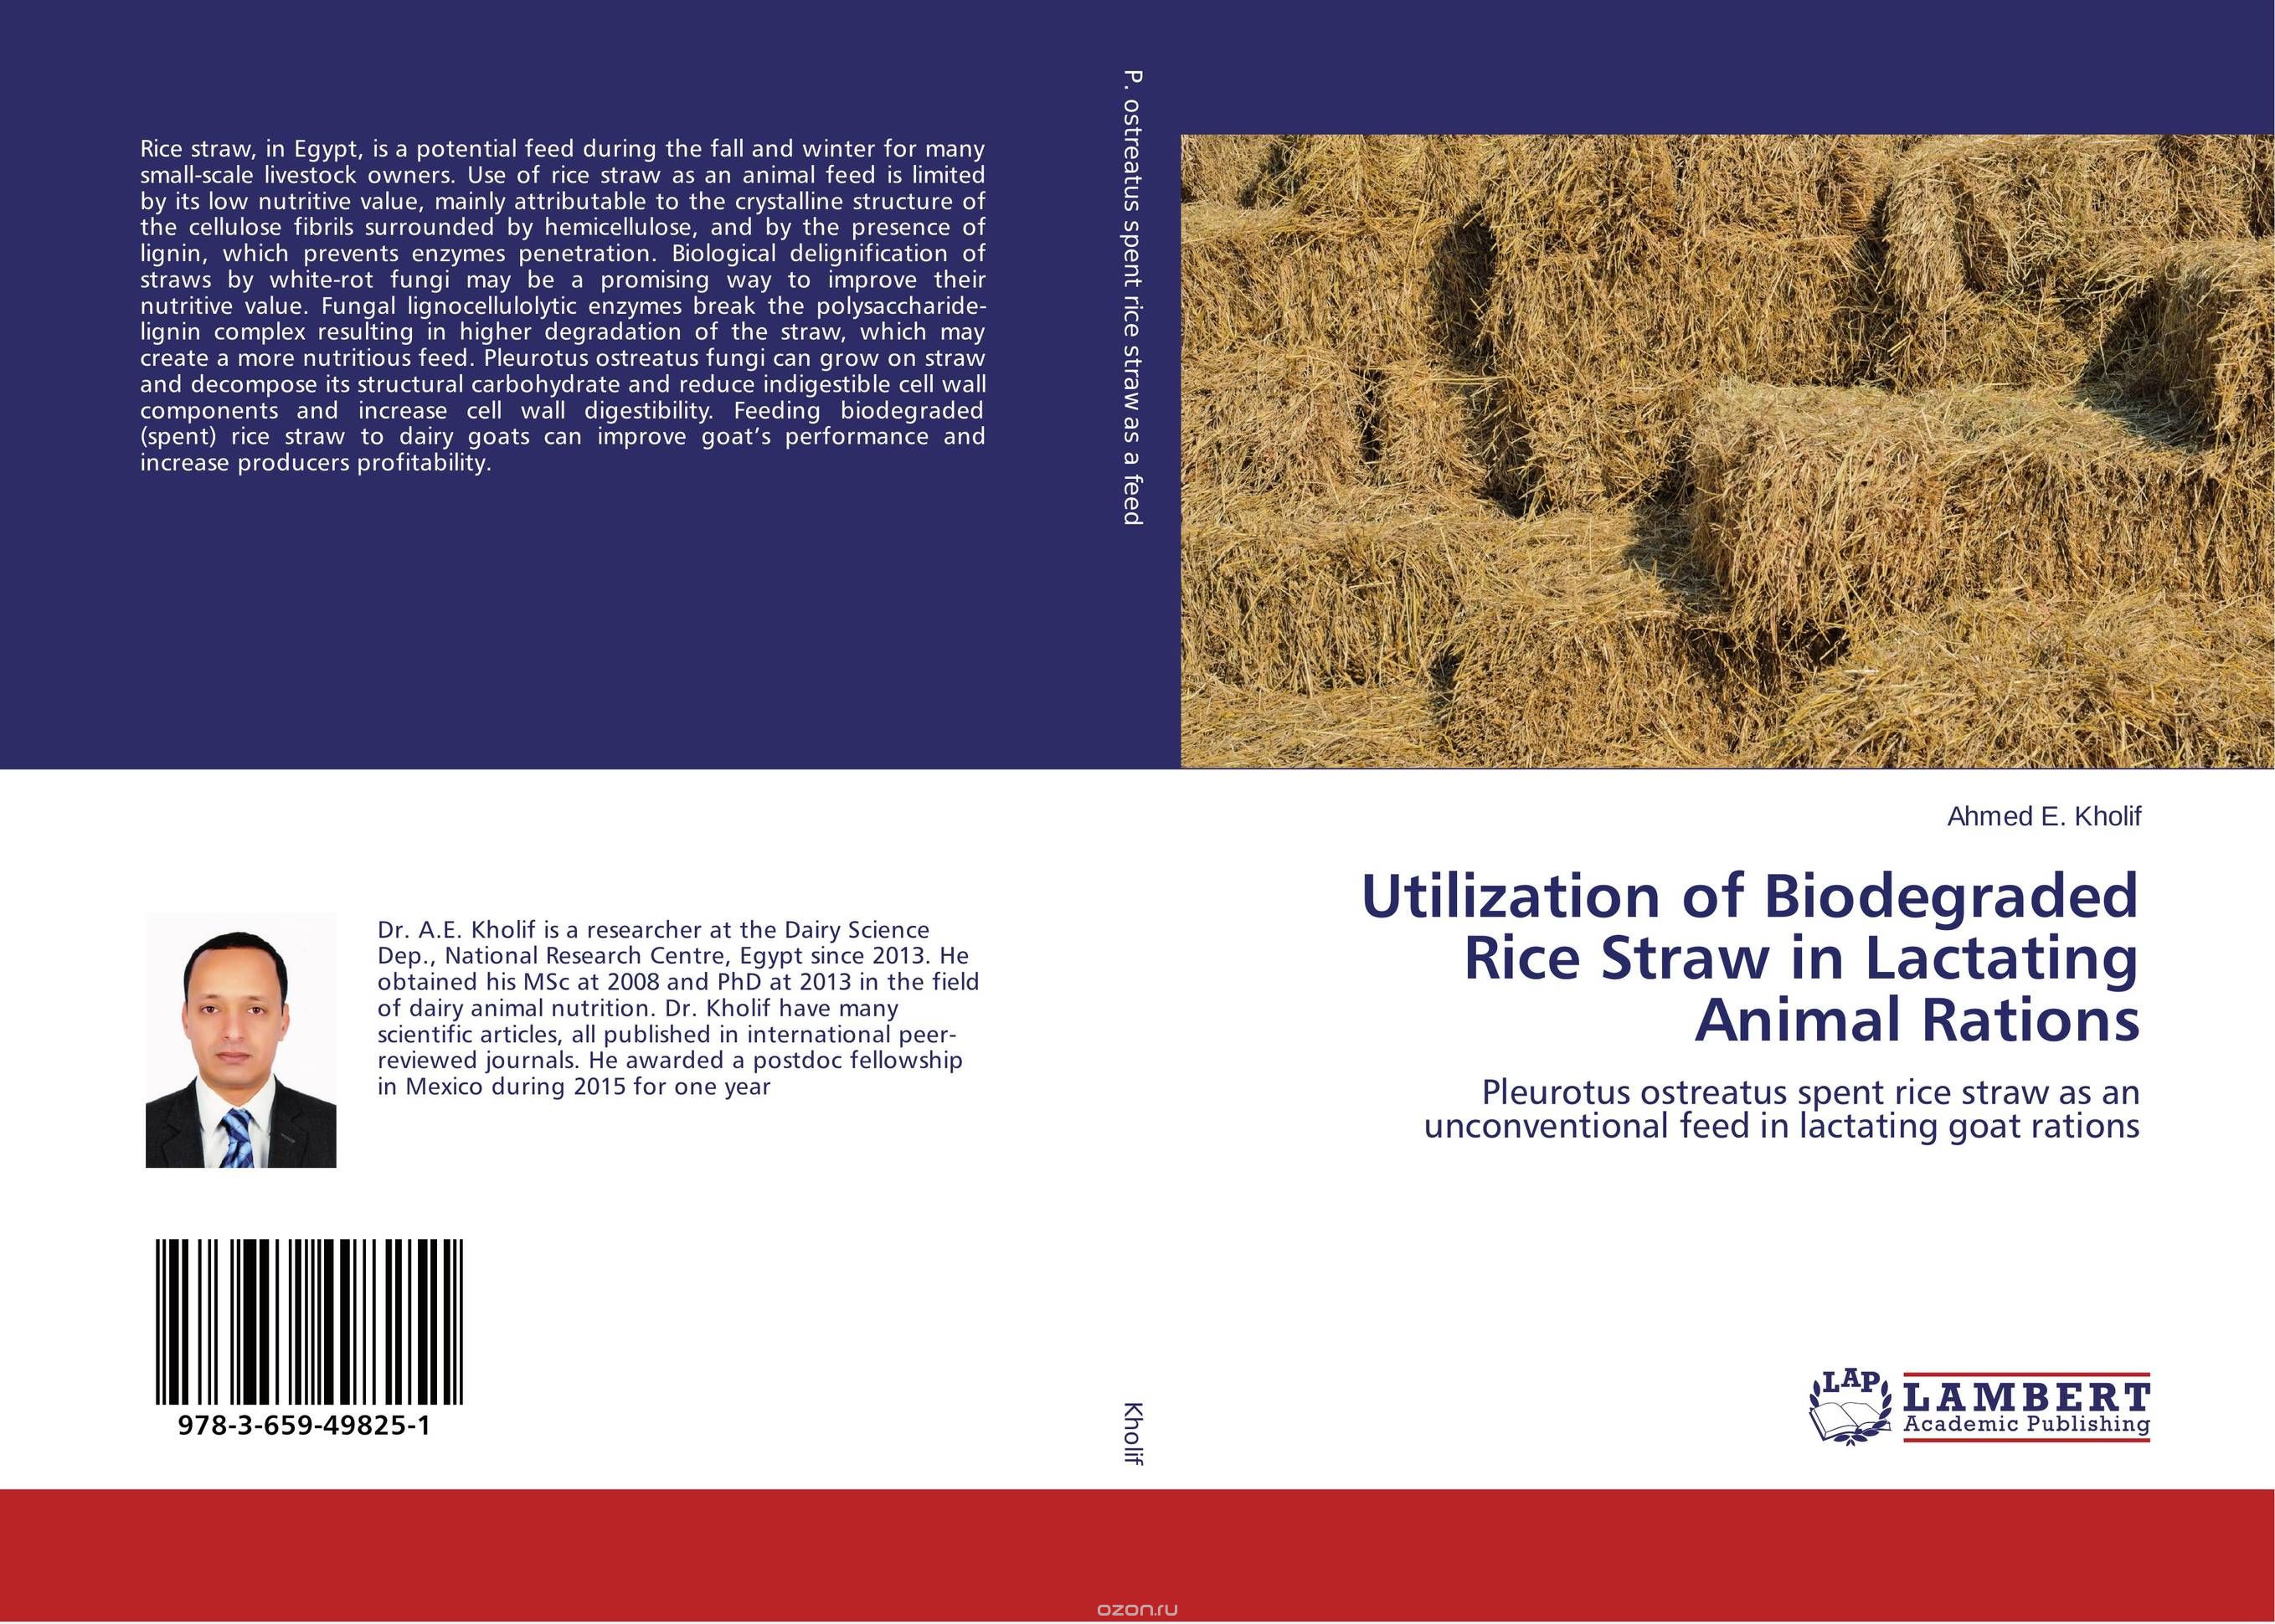 Utilization of Biodegraded Rice Straw in Lactating Animal Rations